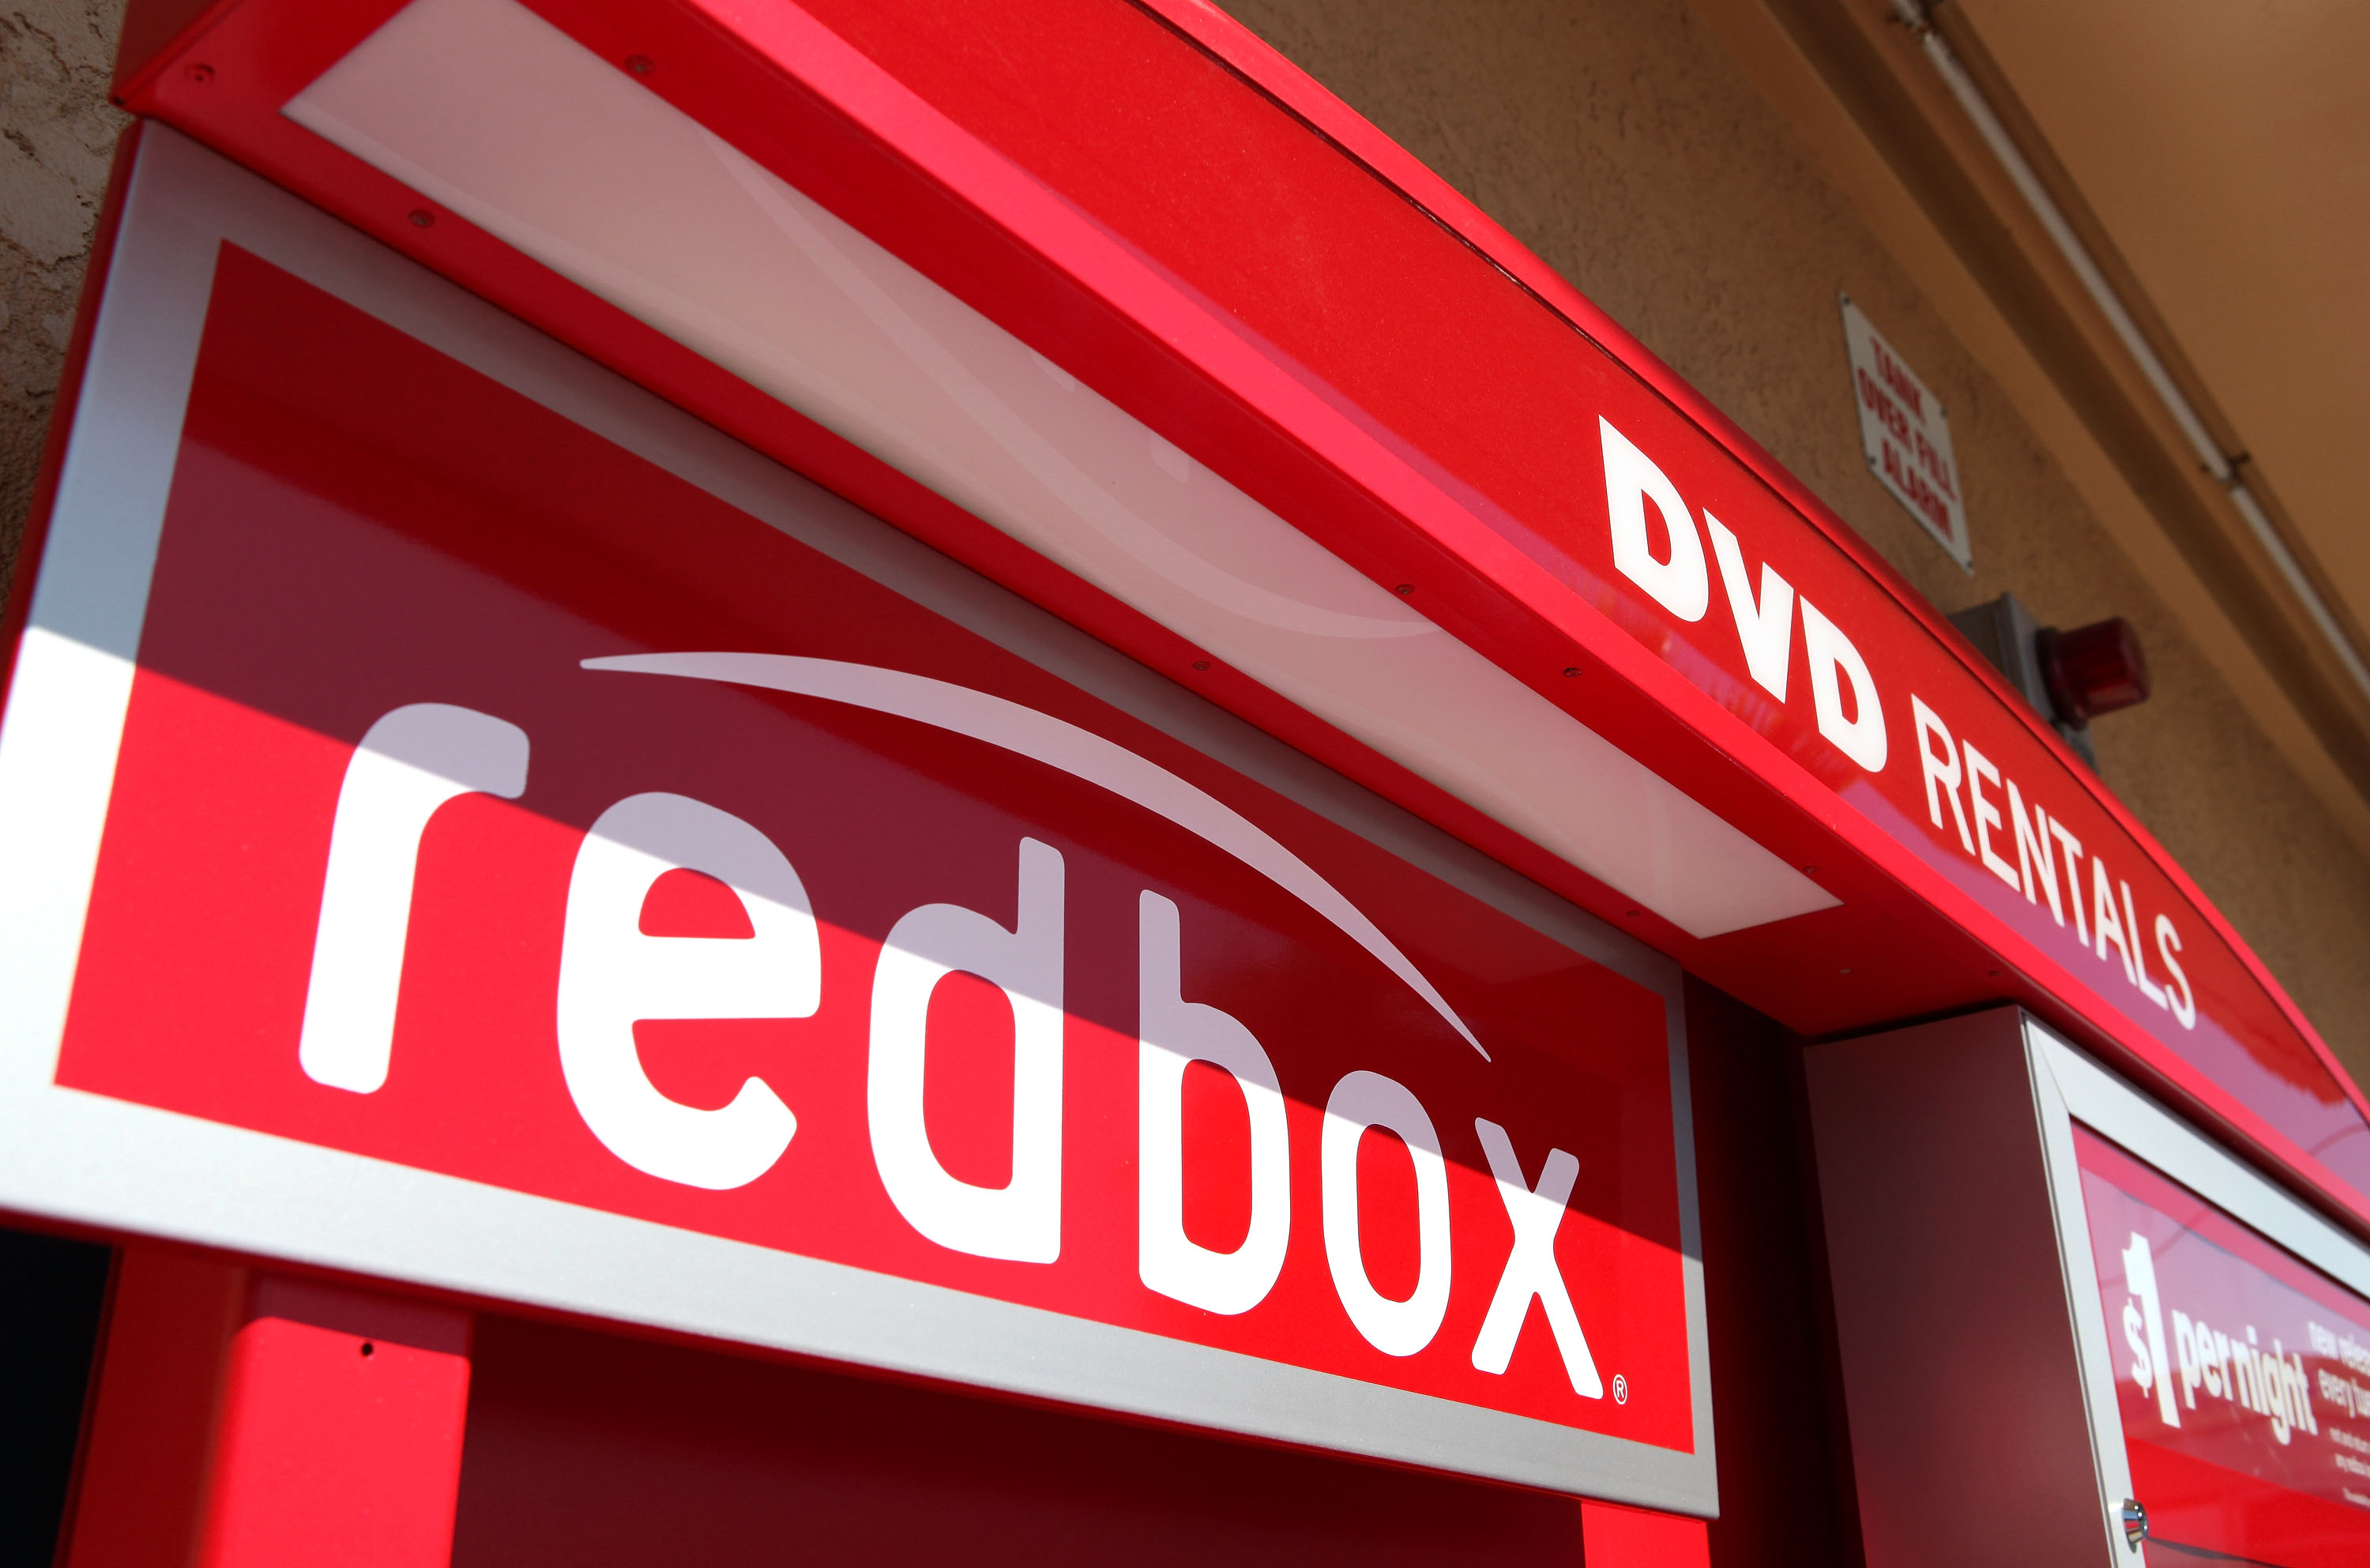 Redbox Instant Is Now Available On LG Smart TVs